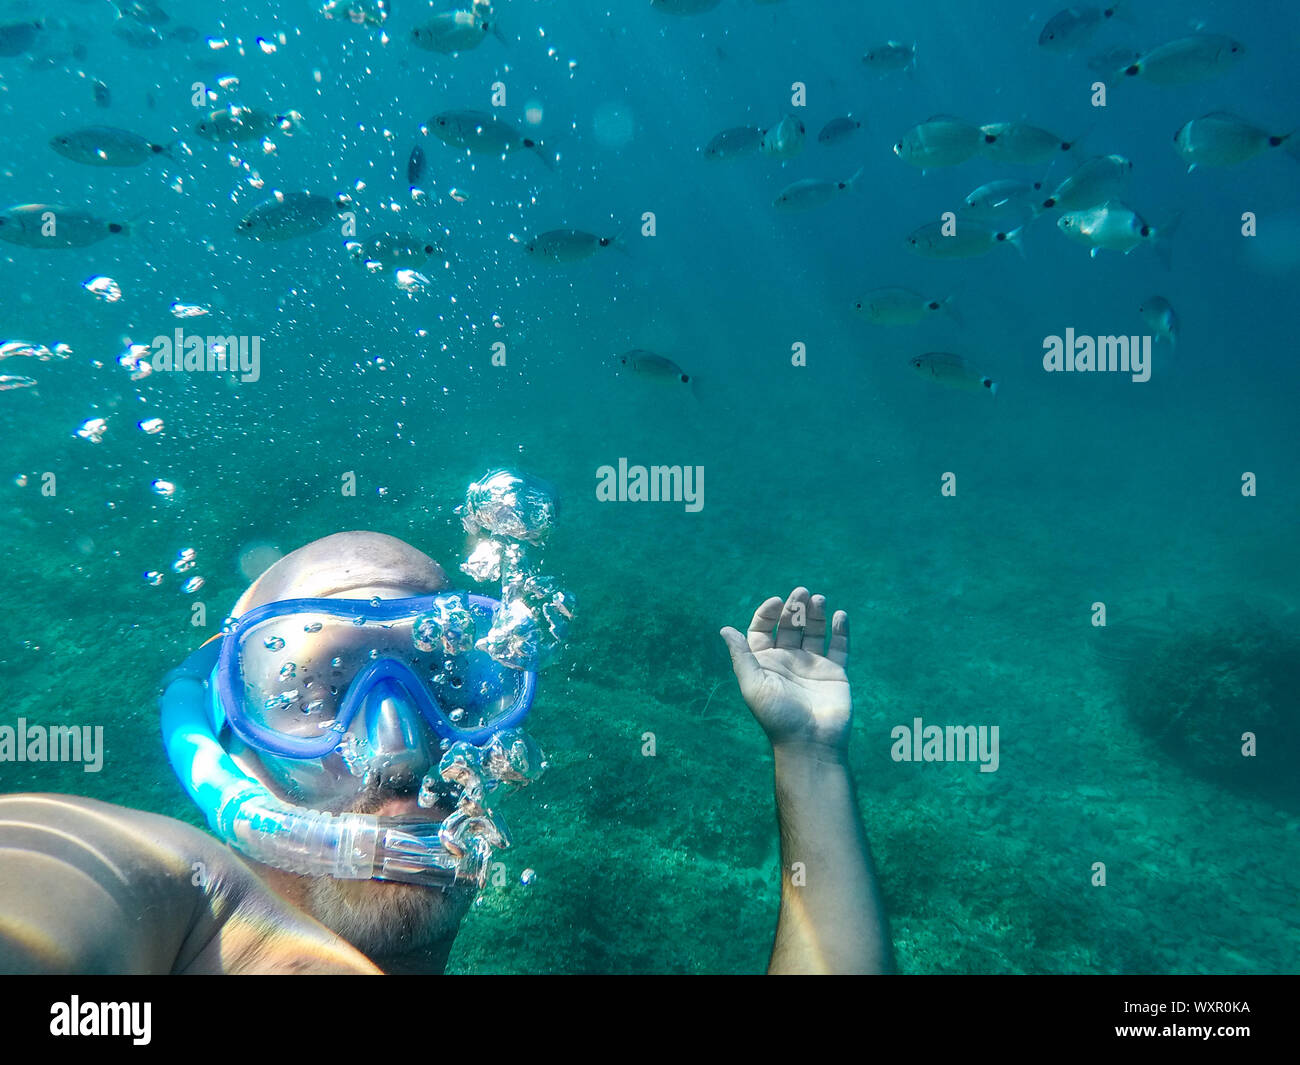 a man snorkling under the water with bubbles and lot of fish Stock Photo